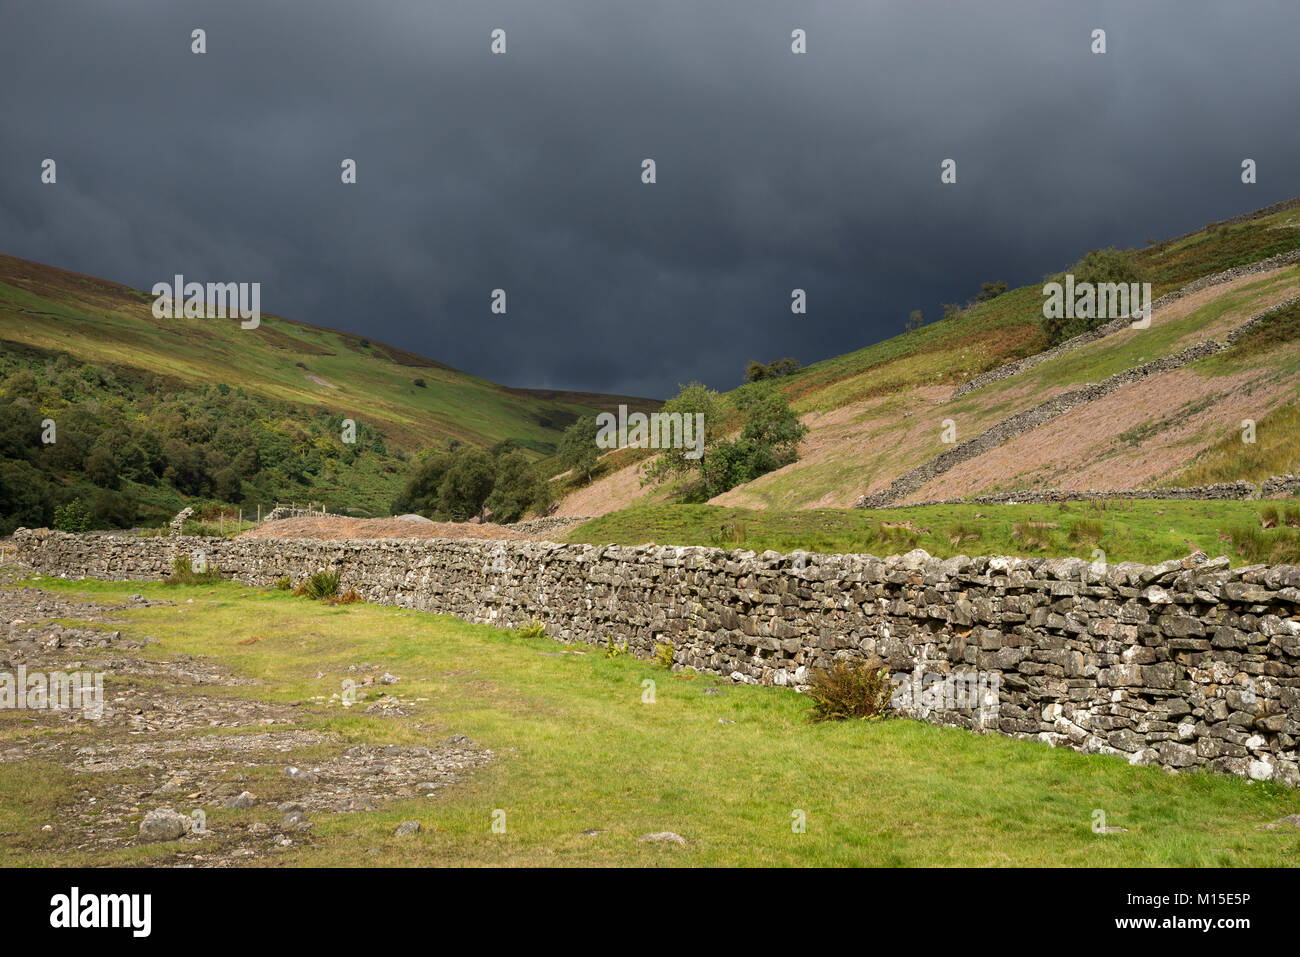 Dark clouds over Gunnerside beck in Swaledale, North Yorkshire, England. Stock Photo